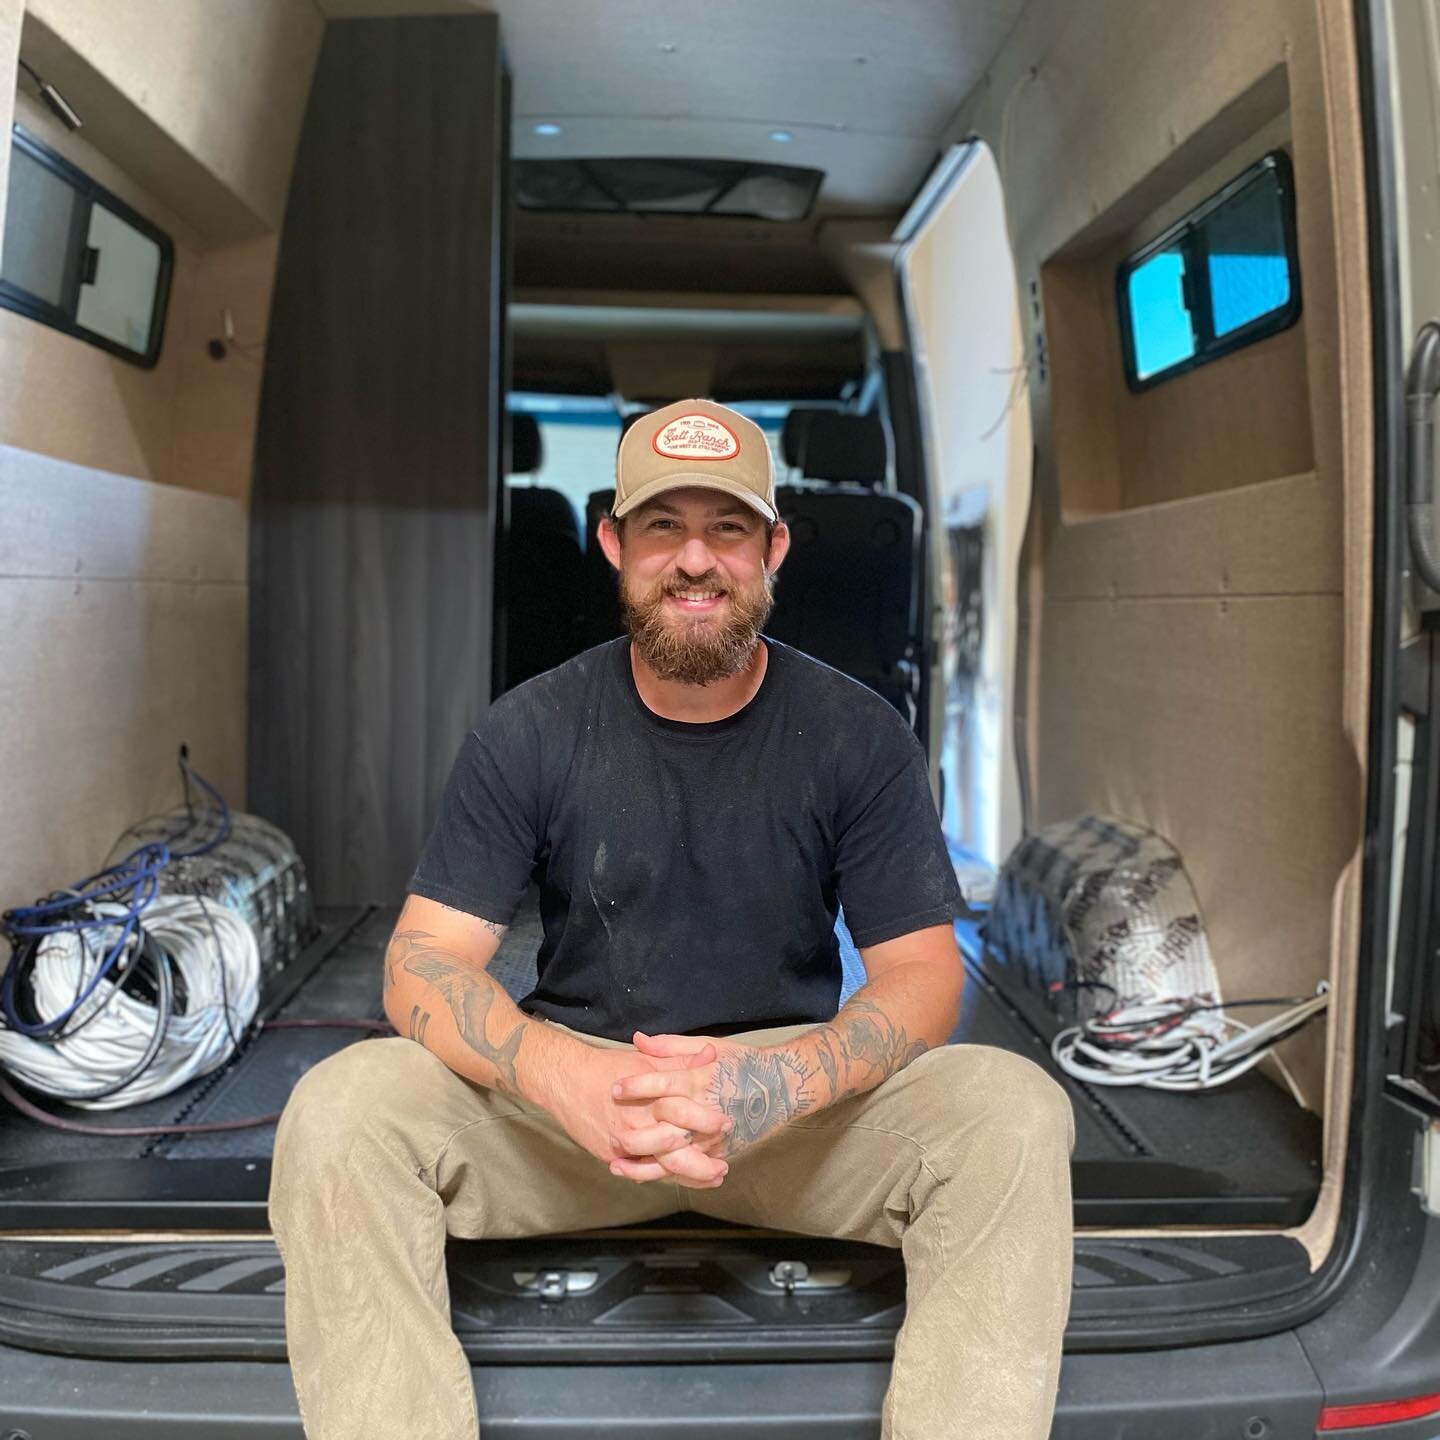 We would like to commemorate @ramblinranchhand for all of his hard work and dedication he has put into @offthegridvanworks. Ian is an incredible craftsman and more importantly, an extraordinary human that brightens our days on a daily basis. We wish 